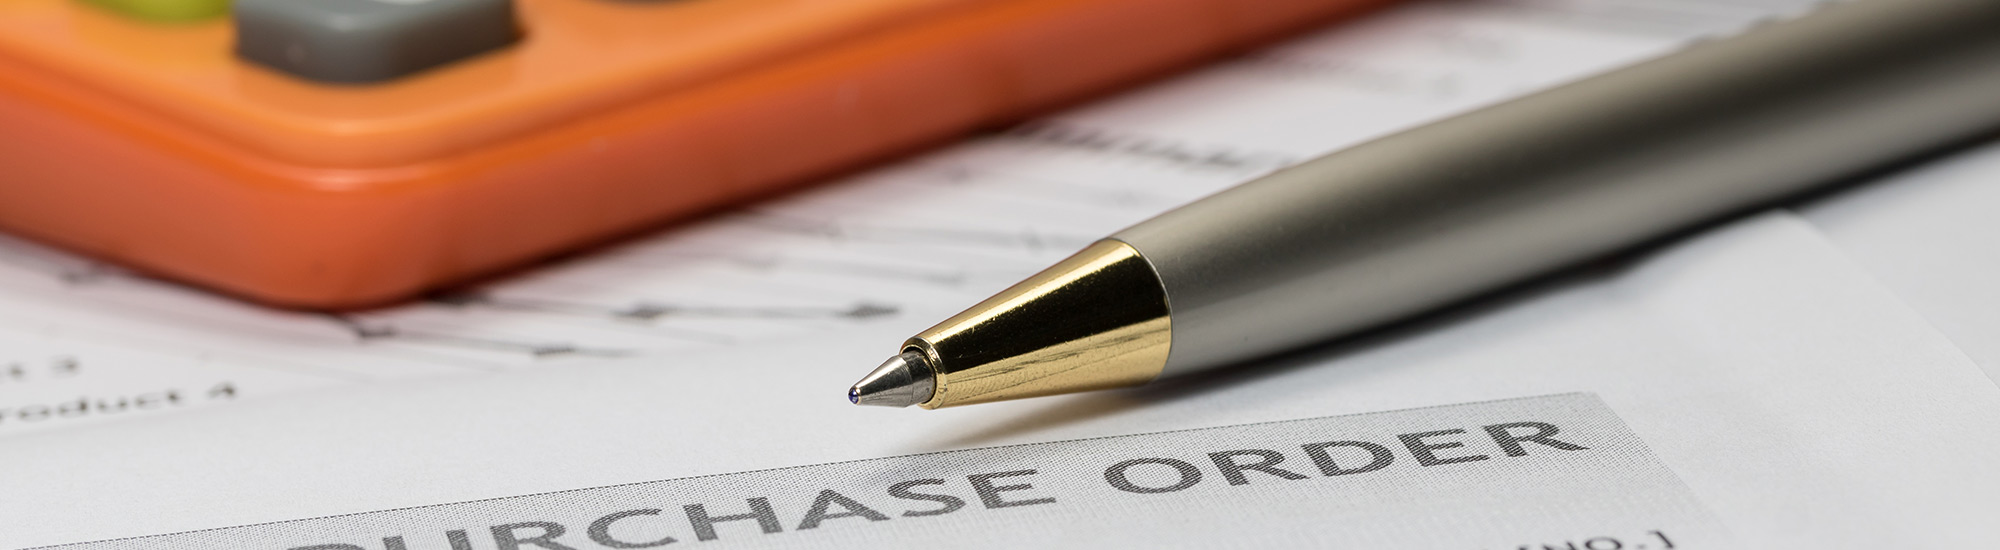 Closeup of the tip of a pen laying on some papers. the letters "U R C H A S E O R D E R" are visible on the paper. The edge of an orange calculator is visible in the background.